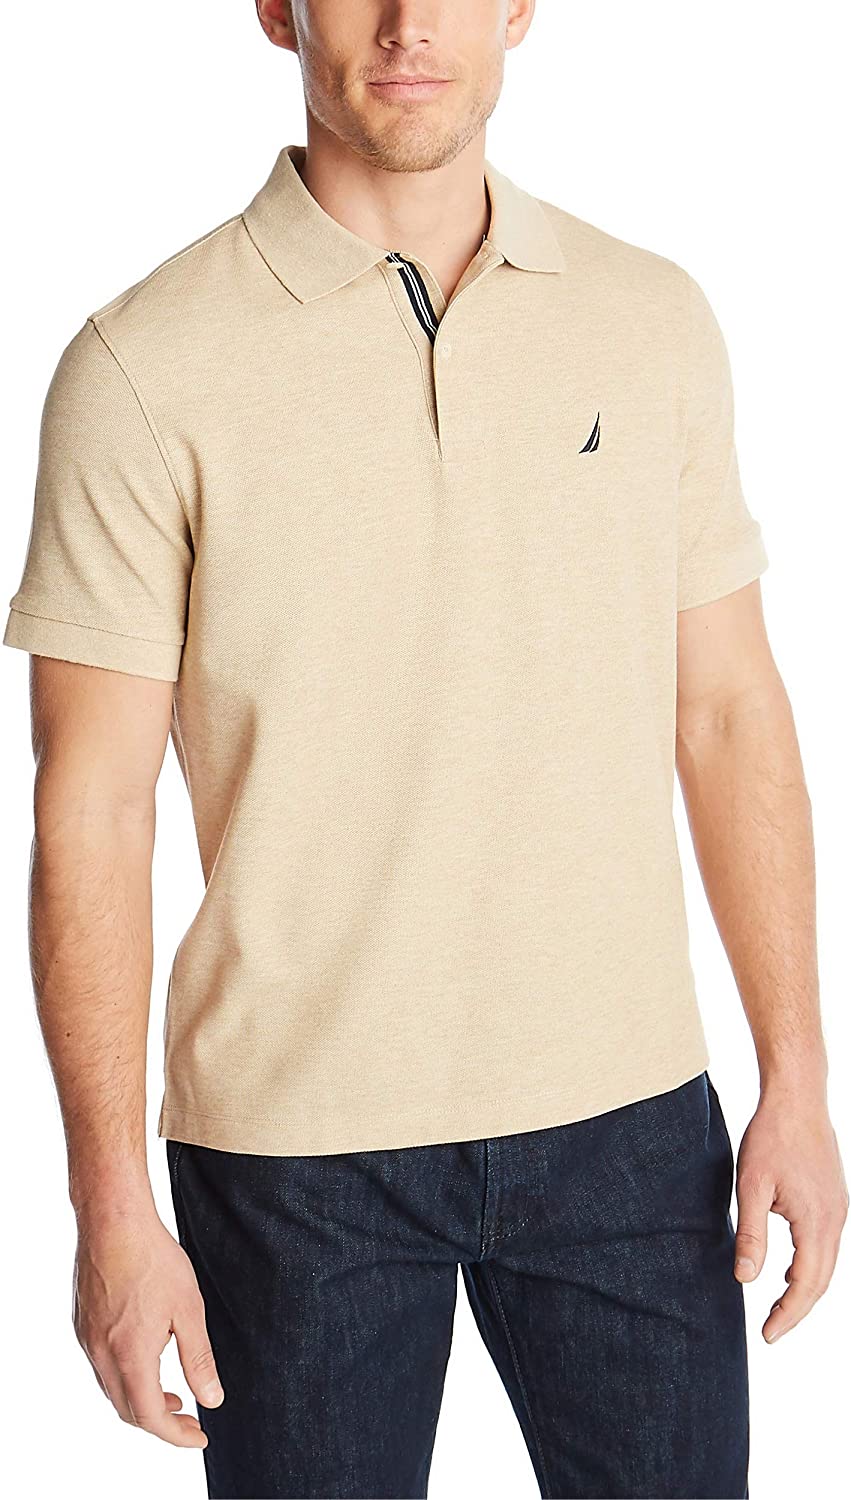 Men's Classic Short Sleeve Solid Polo Shirt